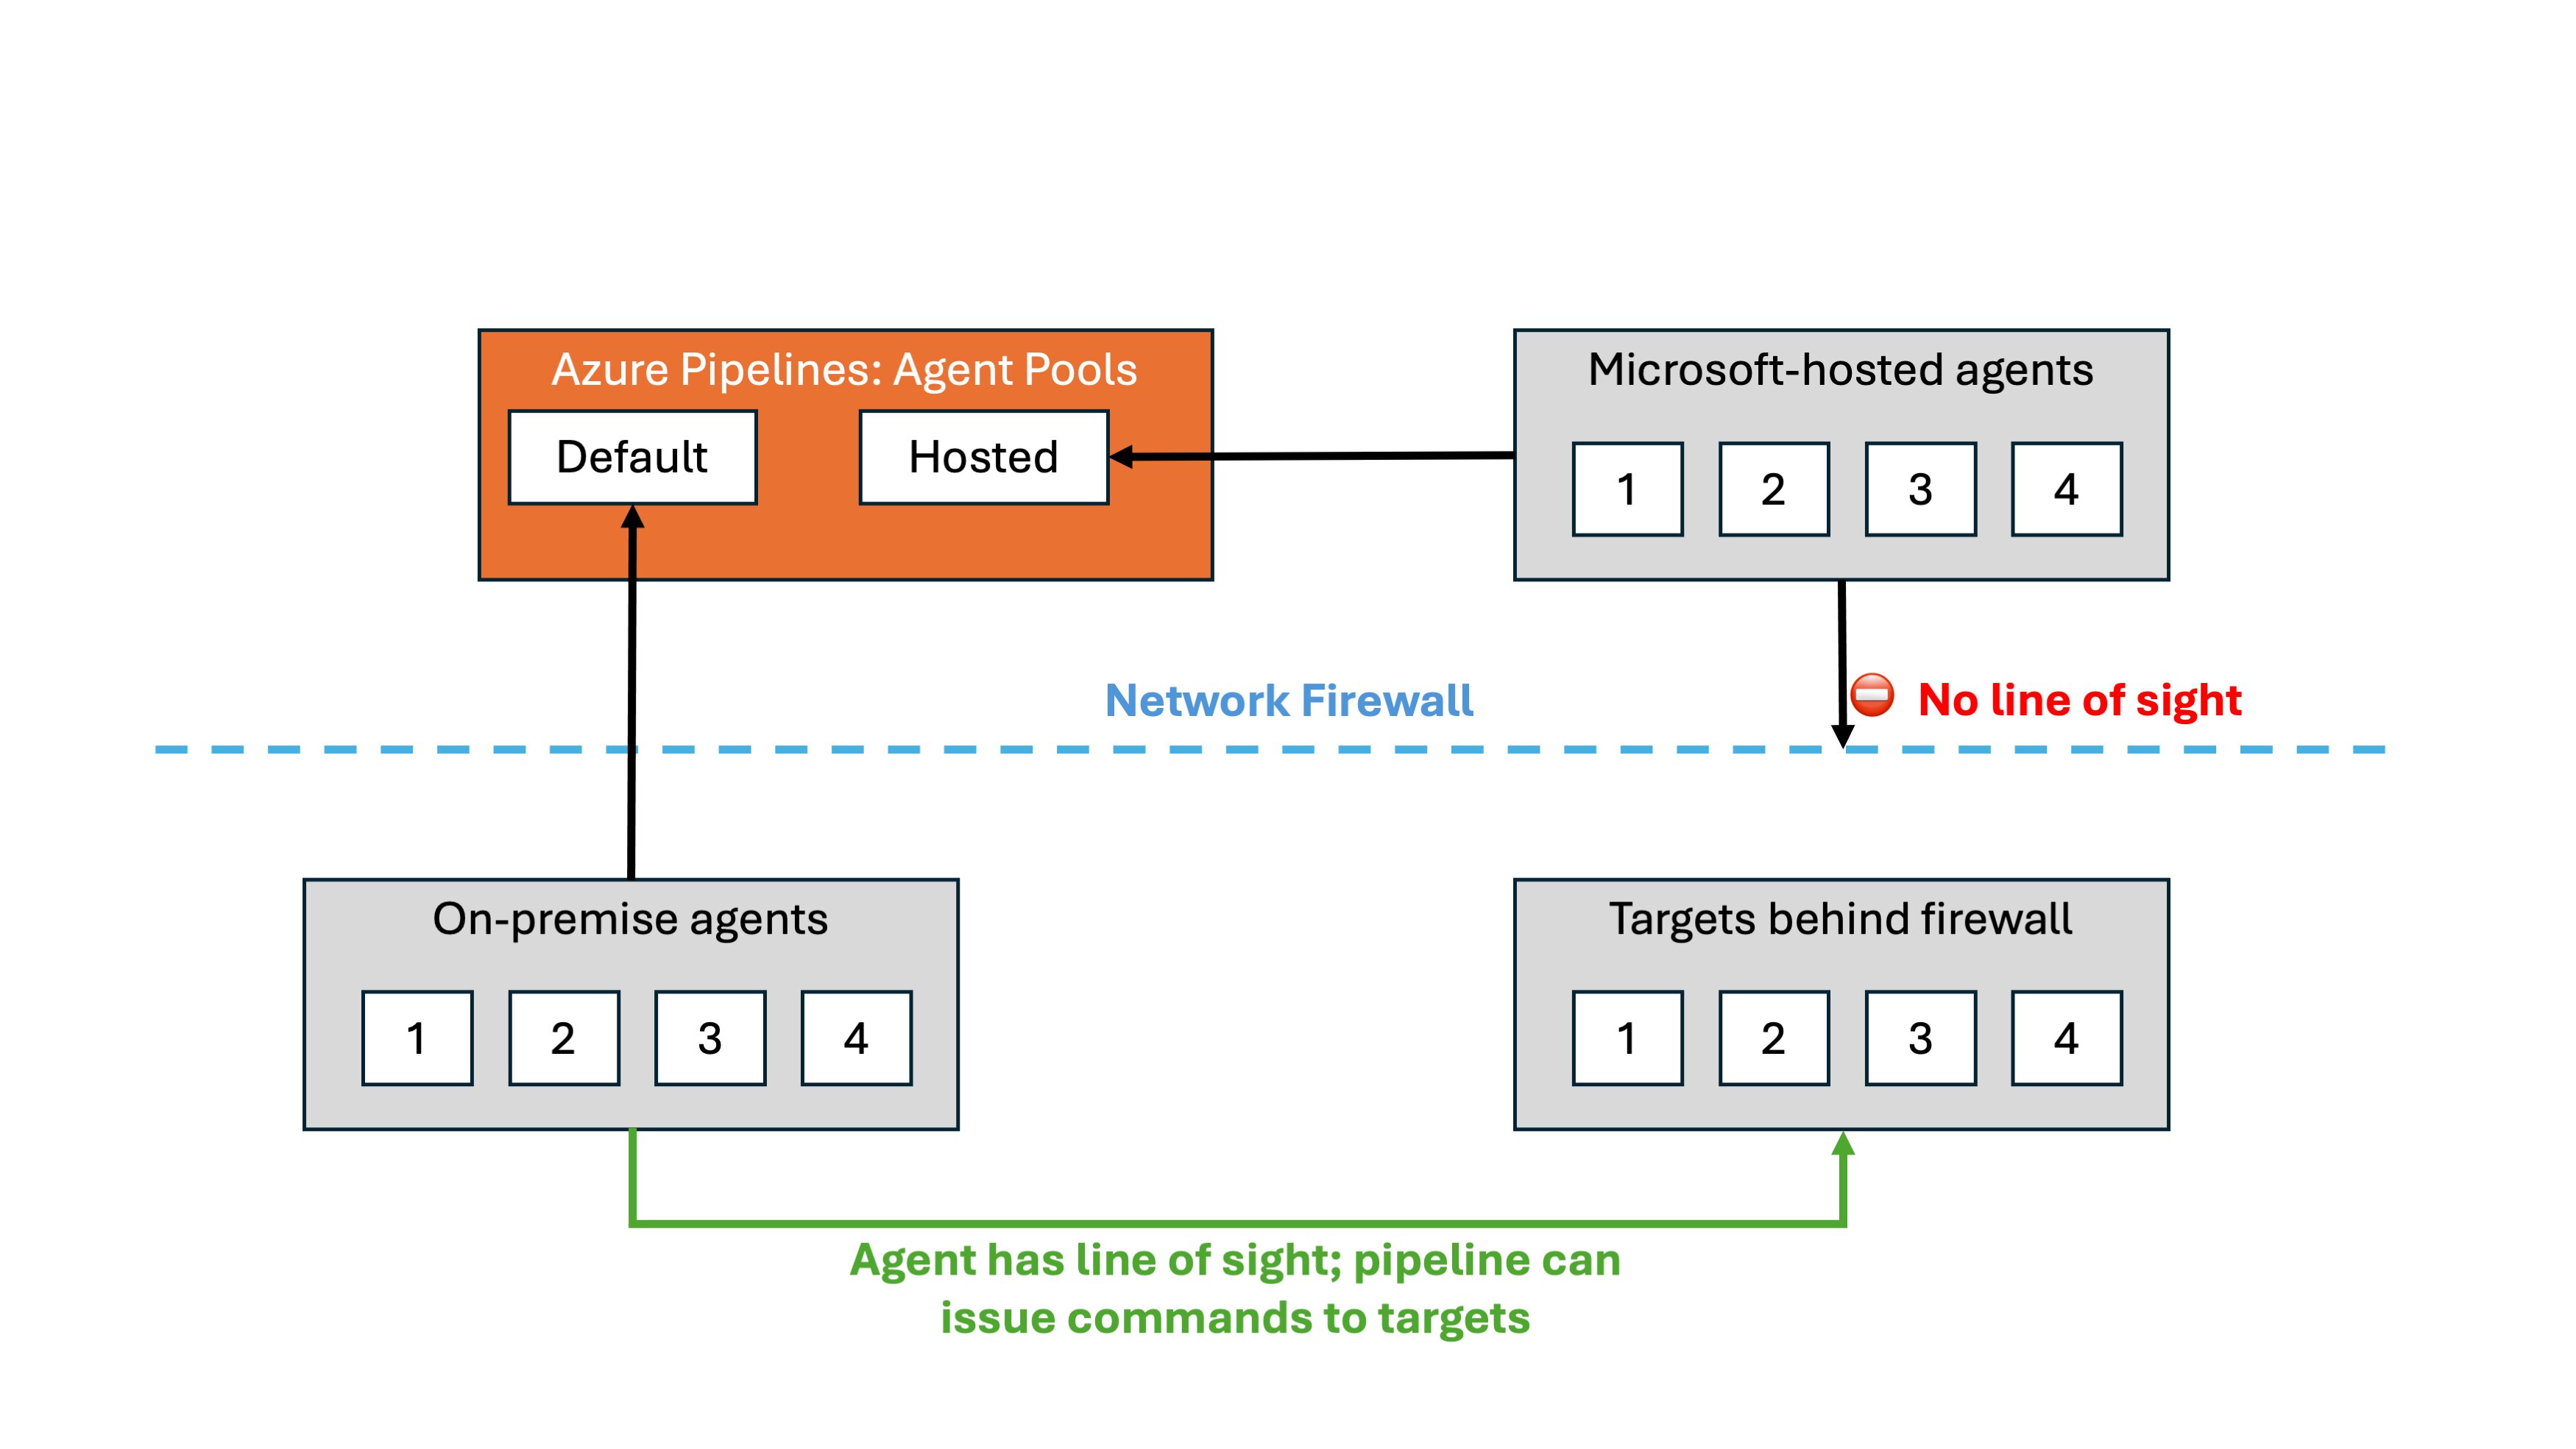 Diagram of two azure pipeline agent pools. One pool has Microsoft hosted agents and cannot access resources that are located behind a corporate firewall. The second pool hosts “on-premise” agents, which can access these resources as long as they have line of sight.